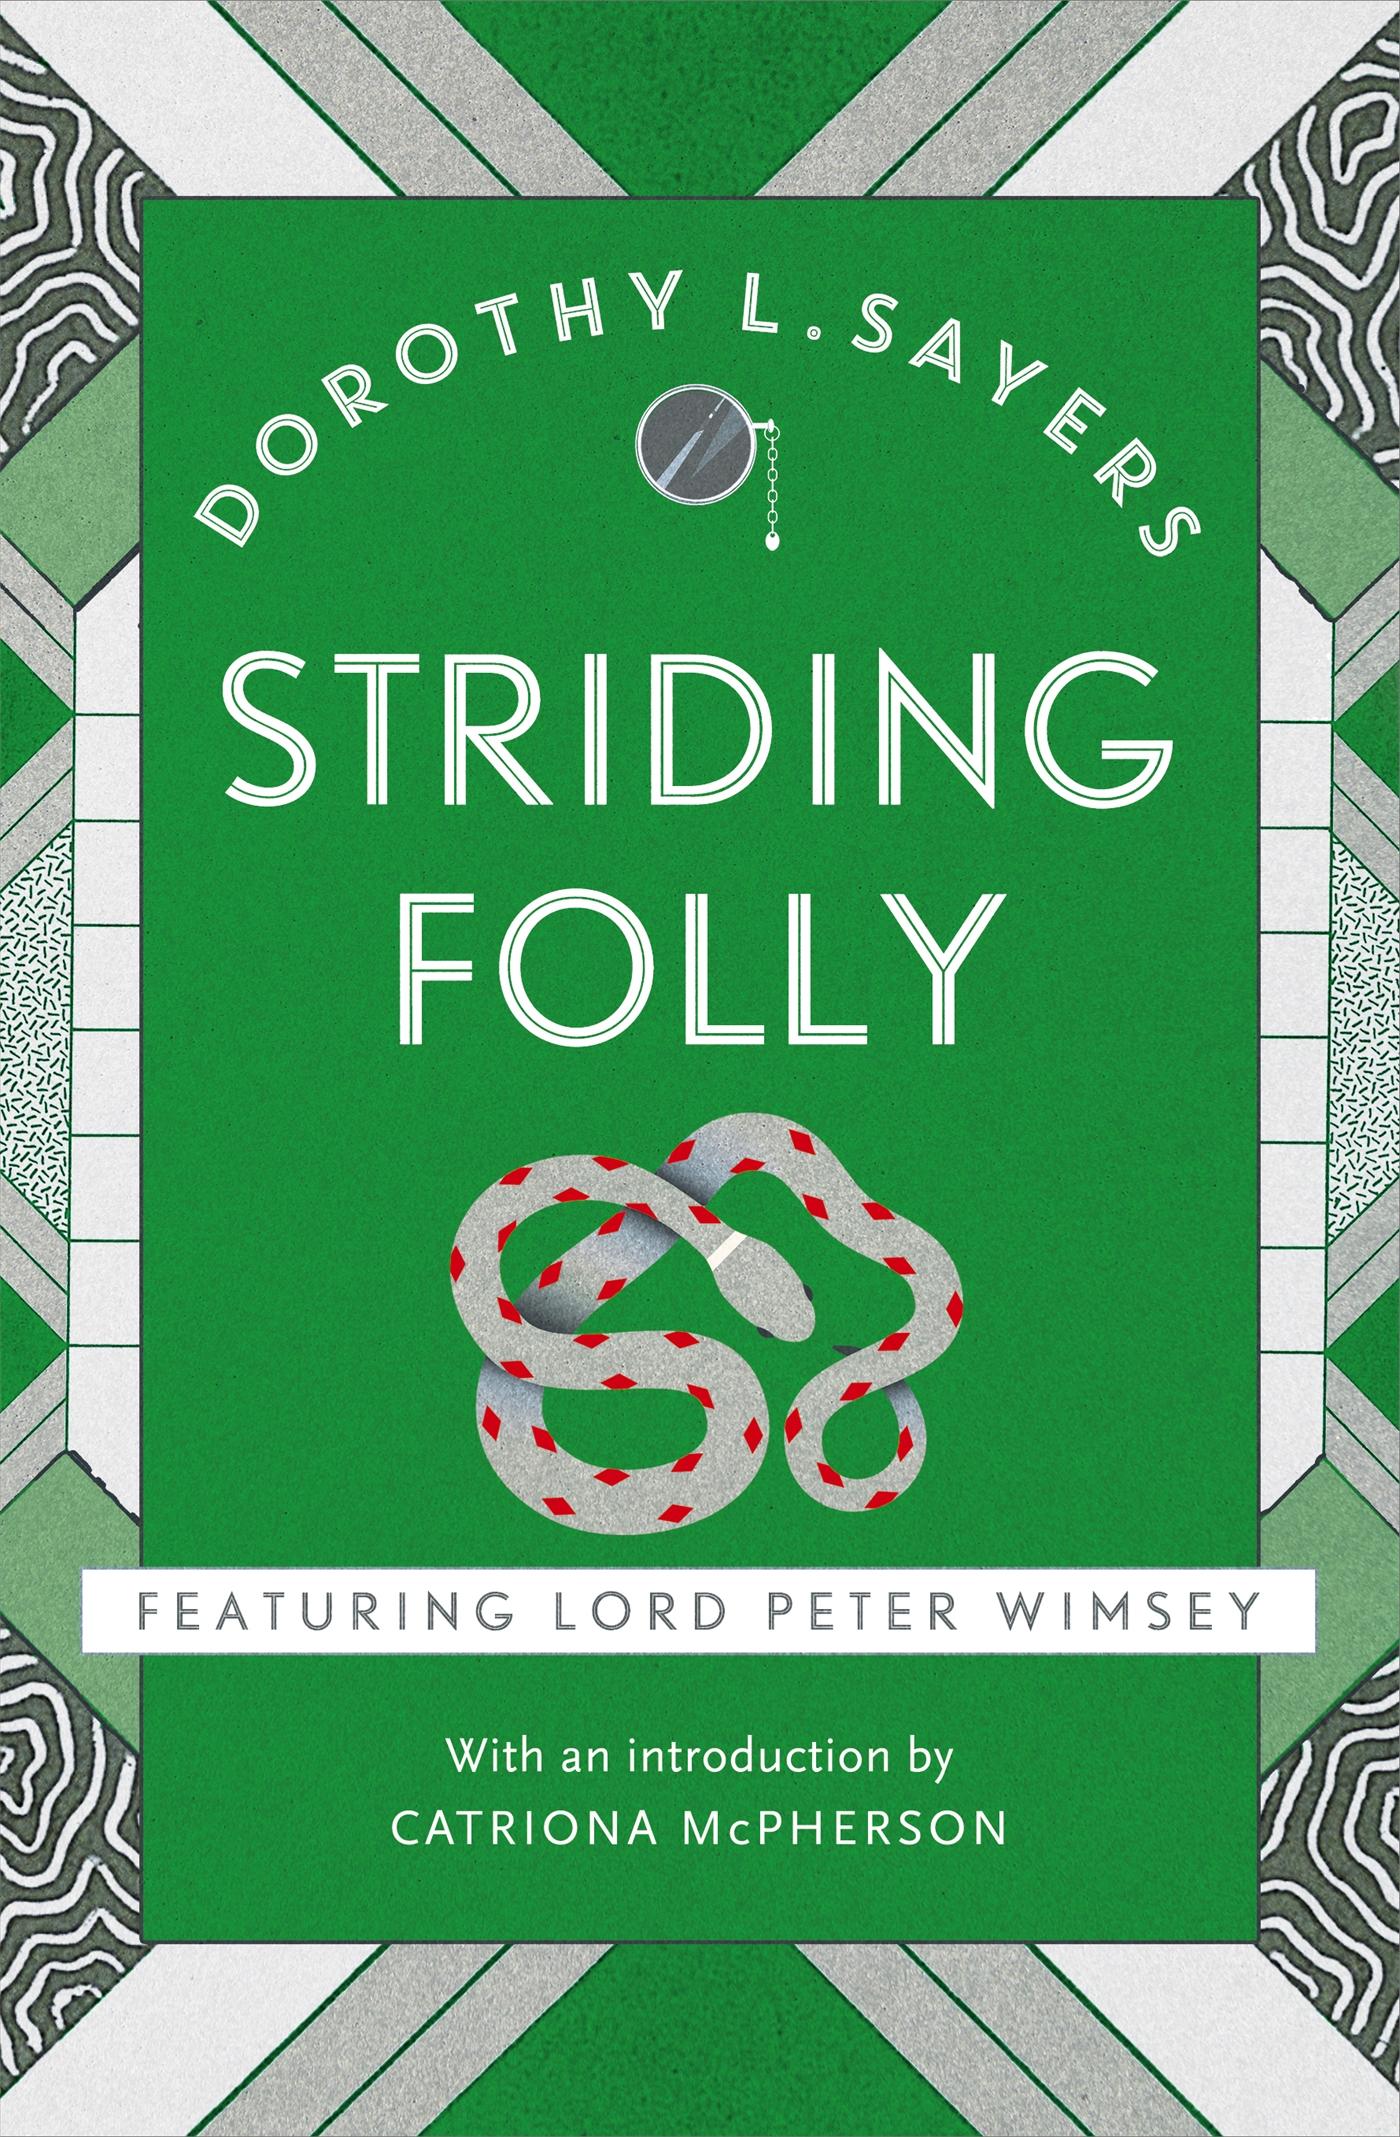 Striding Folly | Classic crime fiction you need to read | Dorothy L Sayers | Taschenbuch | 162 S. | Englisch | 2017 | Hodder & Stoughton | EAN 9781473621510 - Sayers, Dorothy L